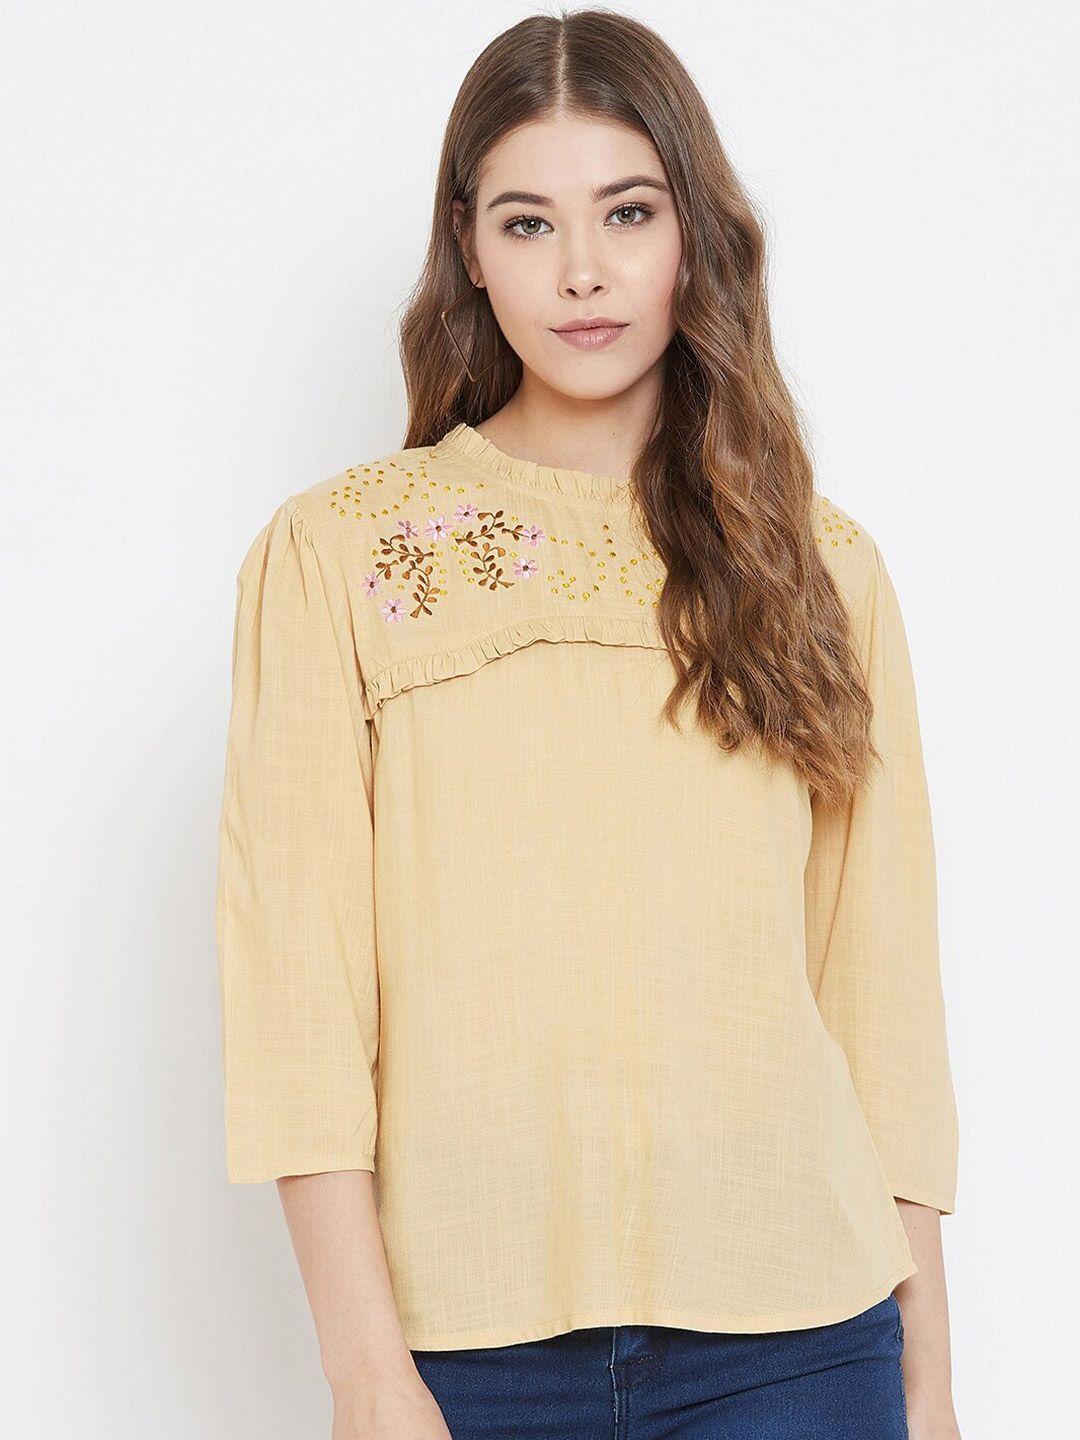 ruhaans floral embroidered round neck casual top